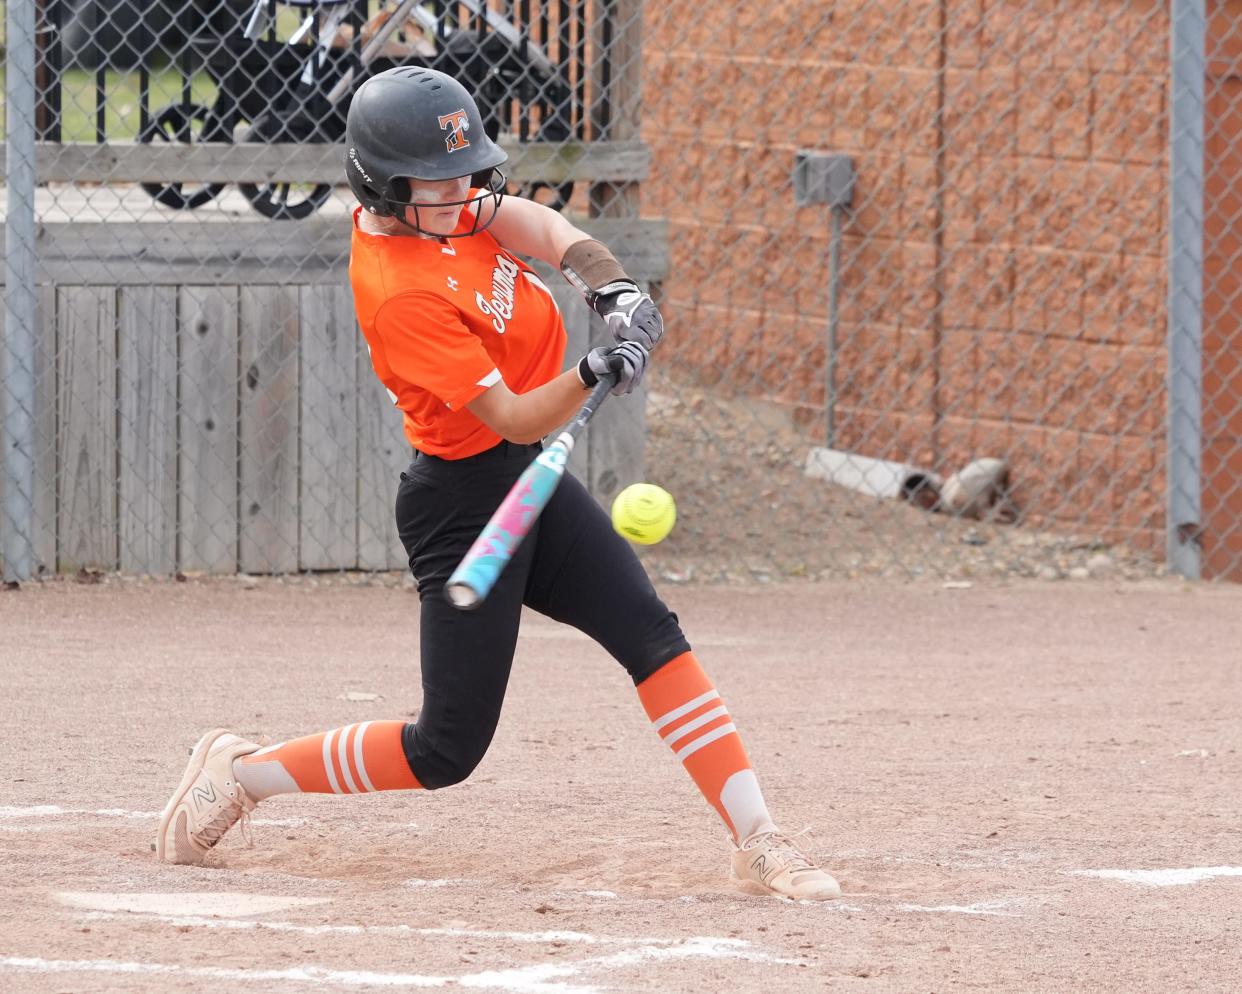 Tecumseh's Wendy Ketola gets a hit during Wednesday's doubleheader against Monroe.